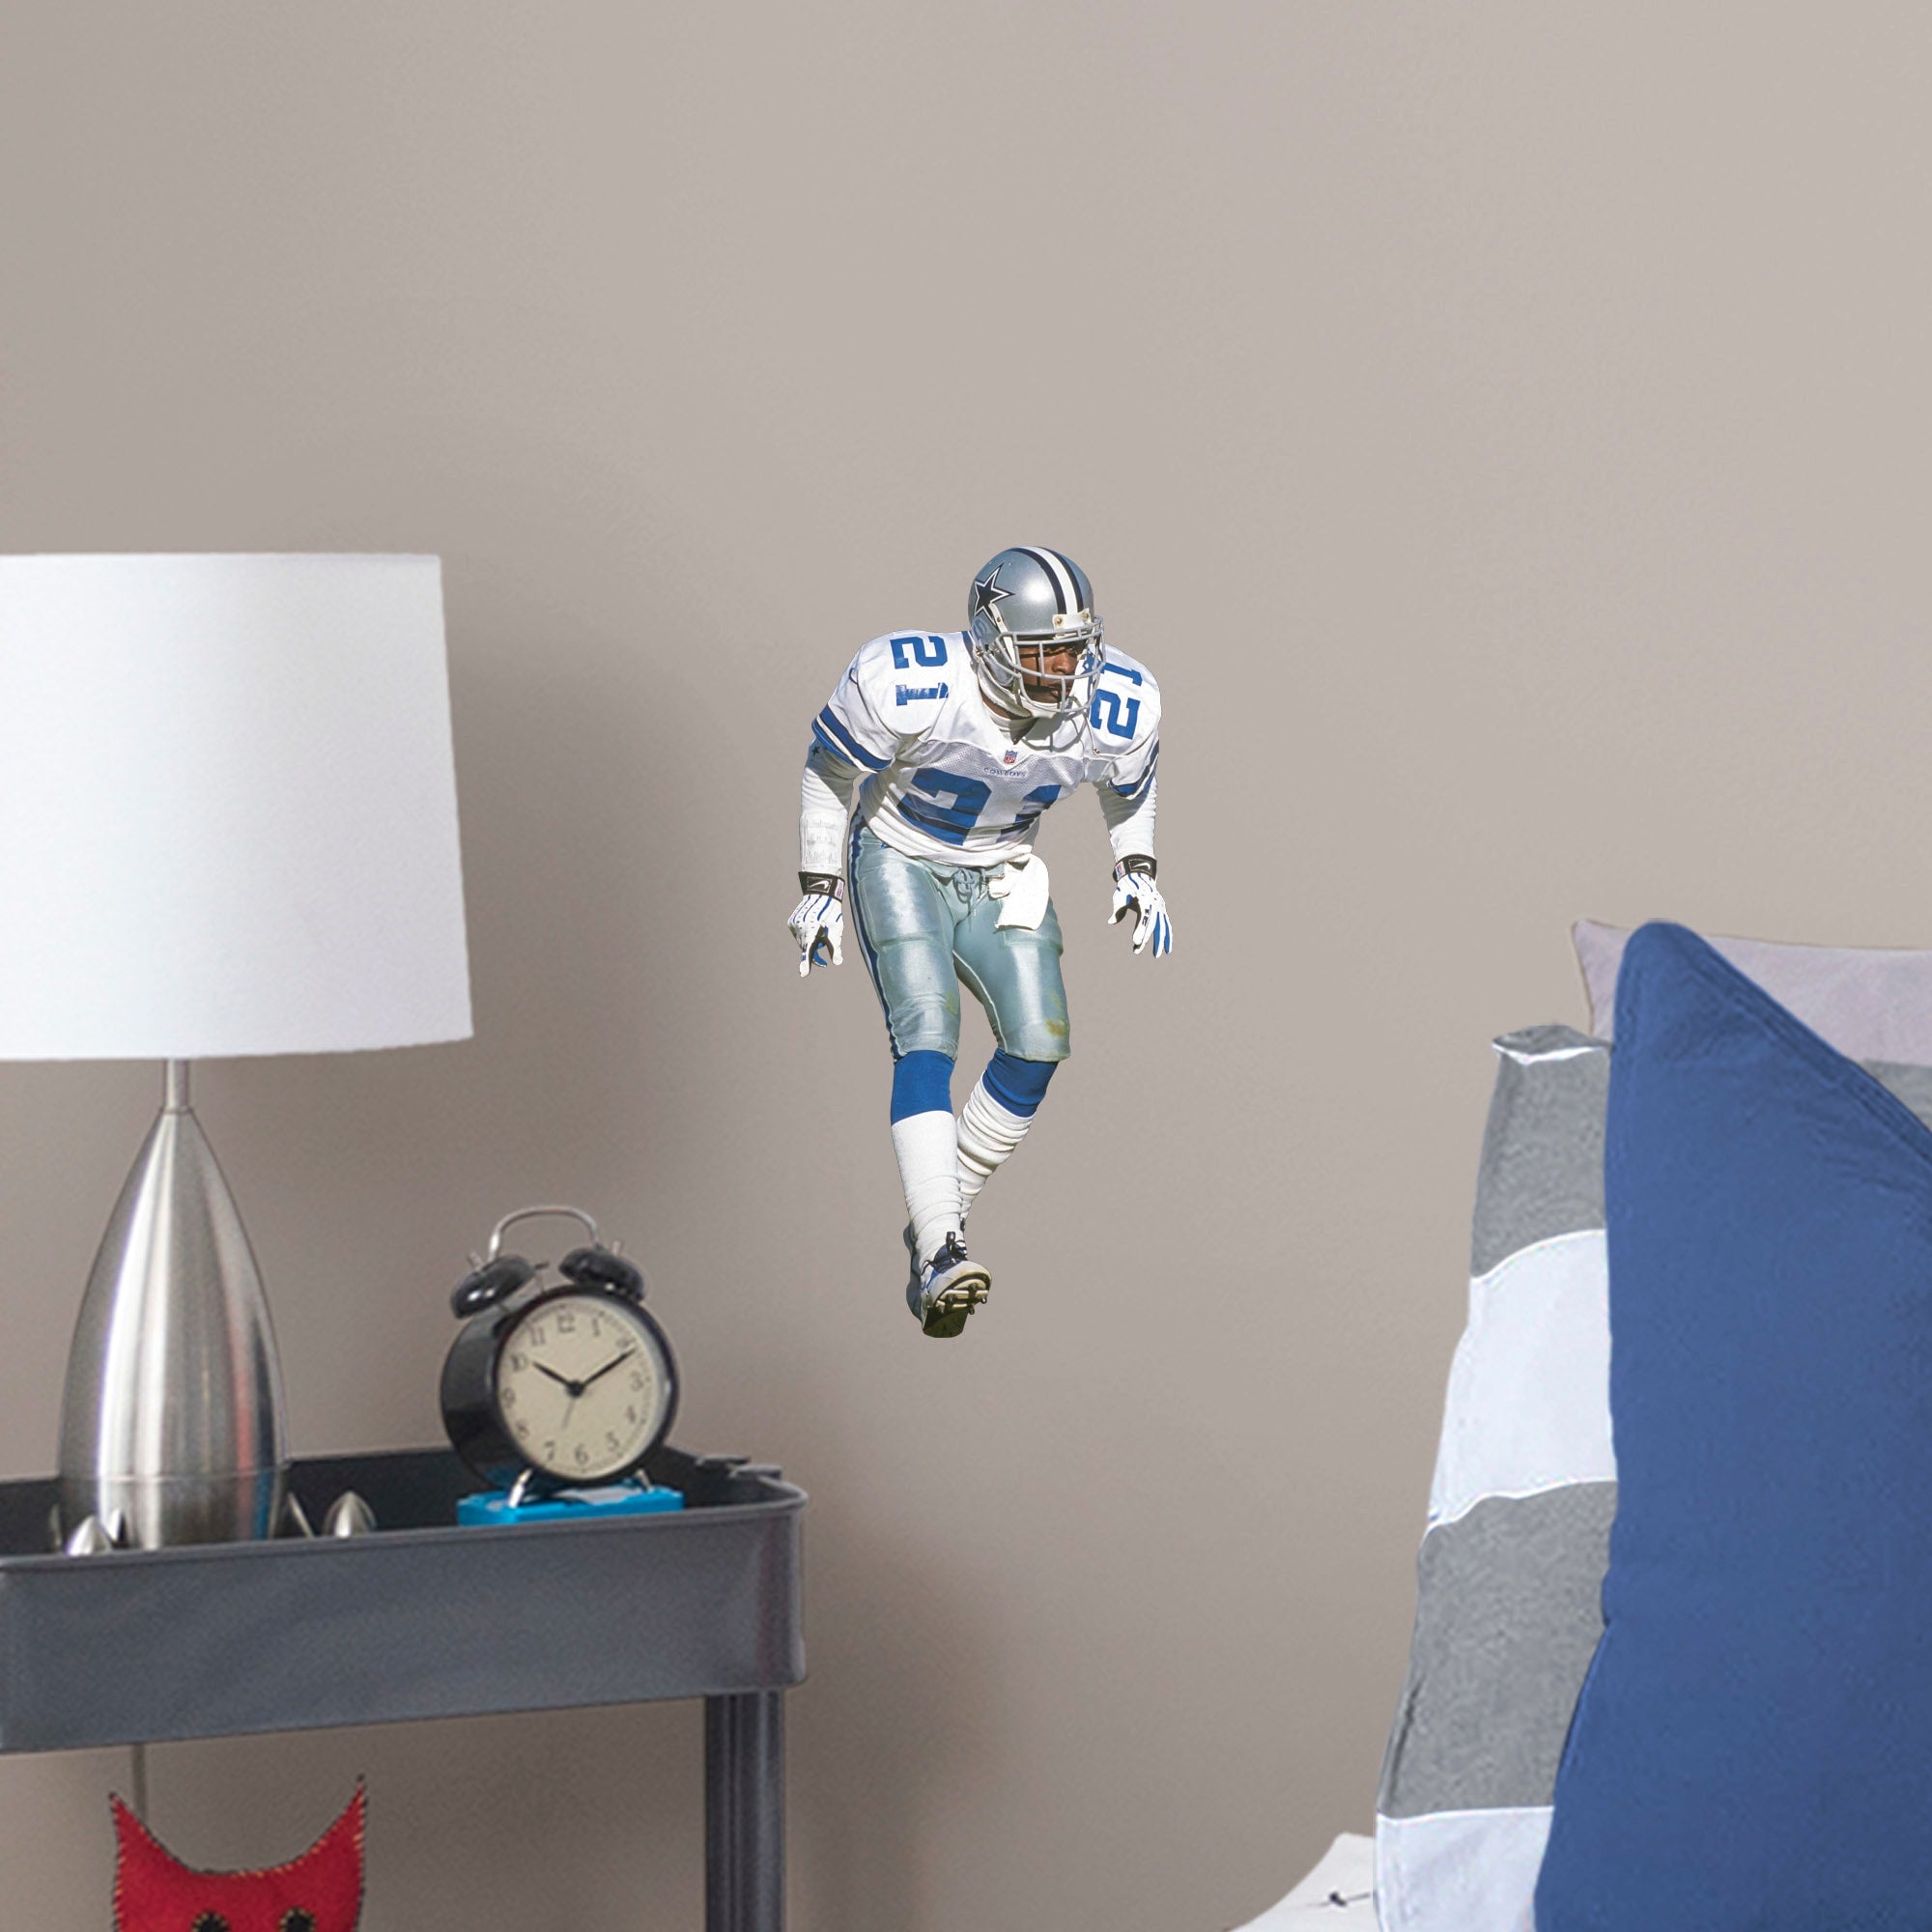 Deion Sanders for Dallas Cowboys: Legend - Officially Licensed NFL Removable Wall Decal Large by Fathead | Vinyl